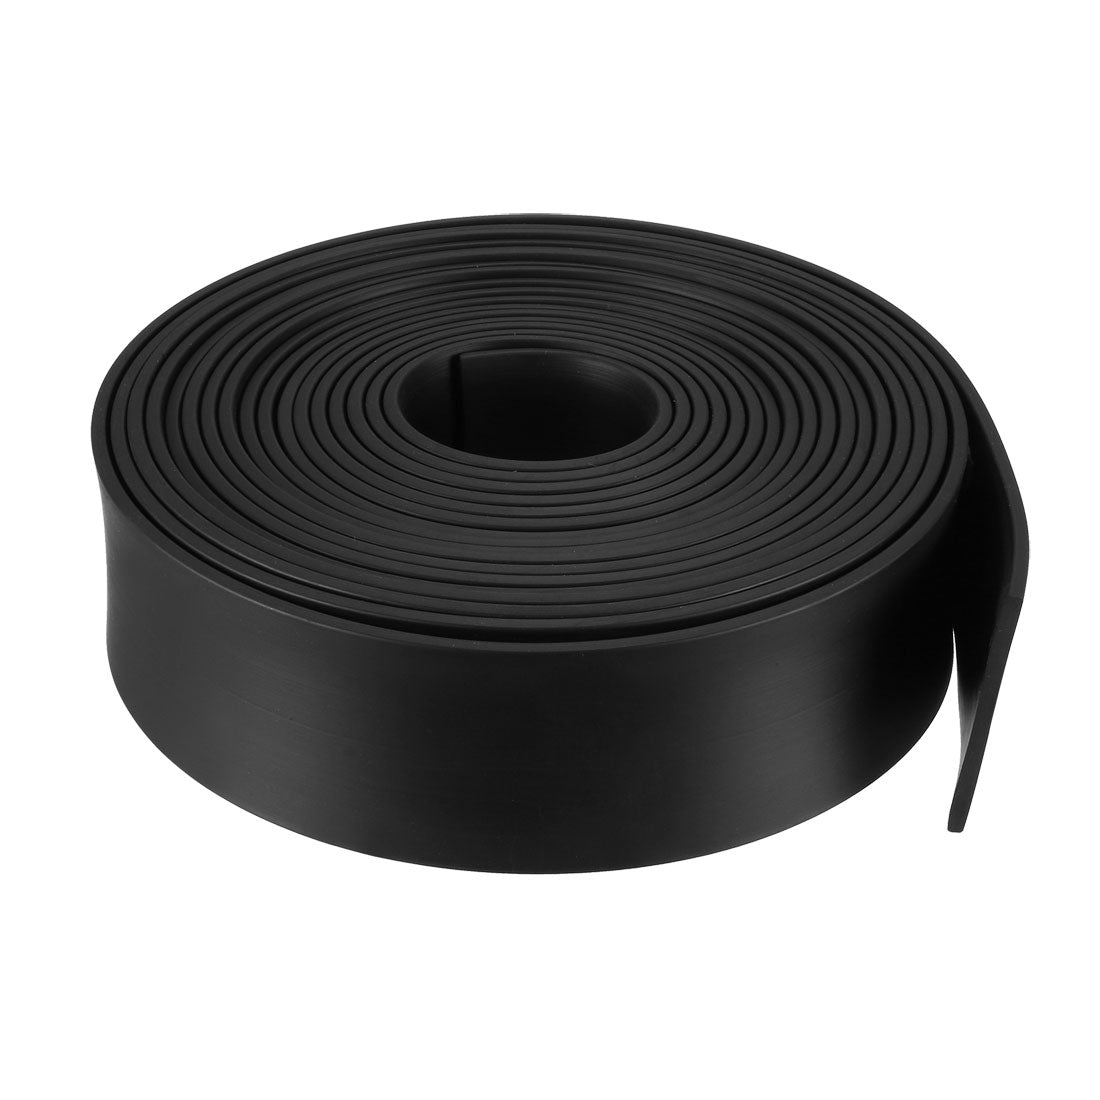 uxcell Uxcell Solid Rectangle Rubber Seal Strip 10mm Wide 5mm Thick, 5 Meters Long Black